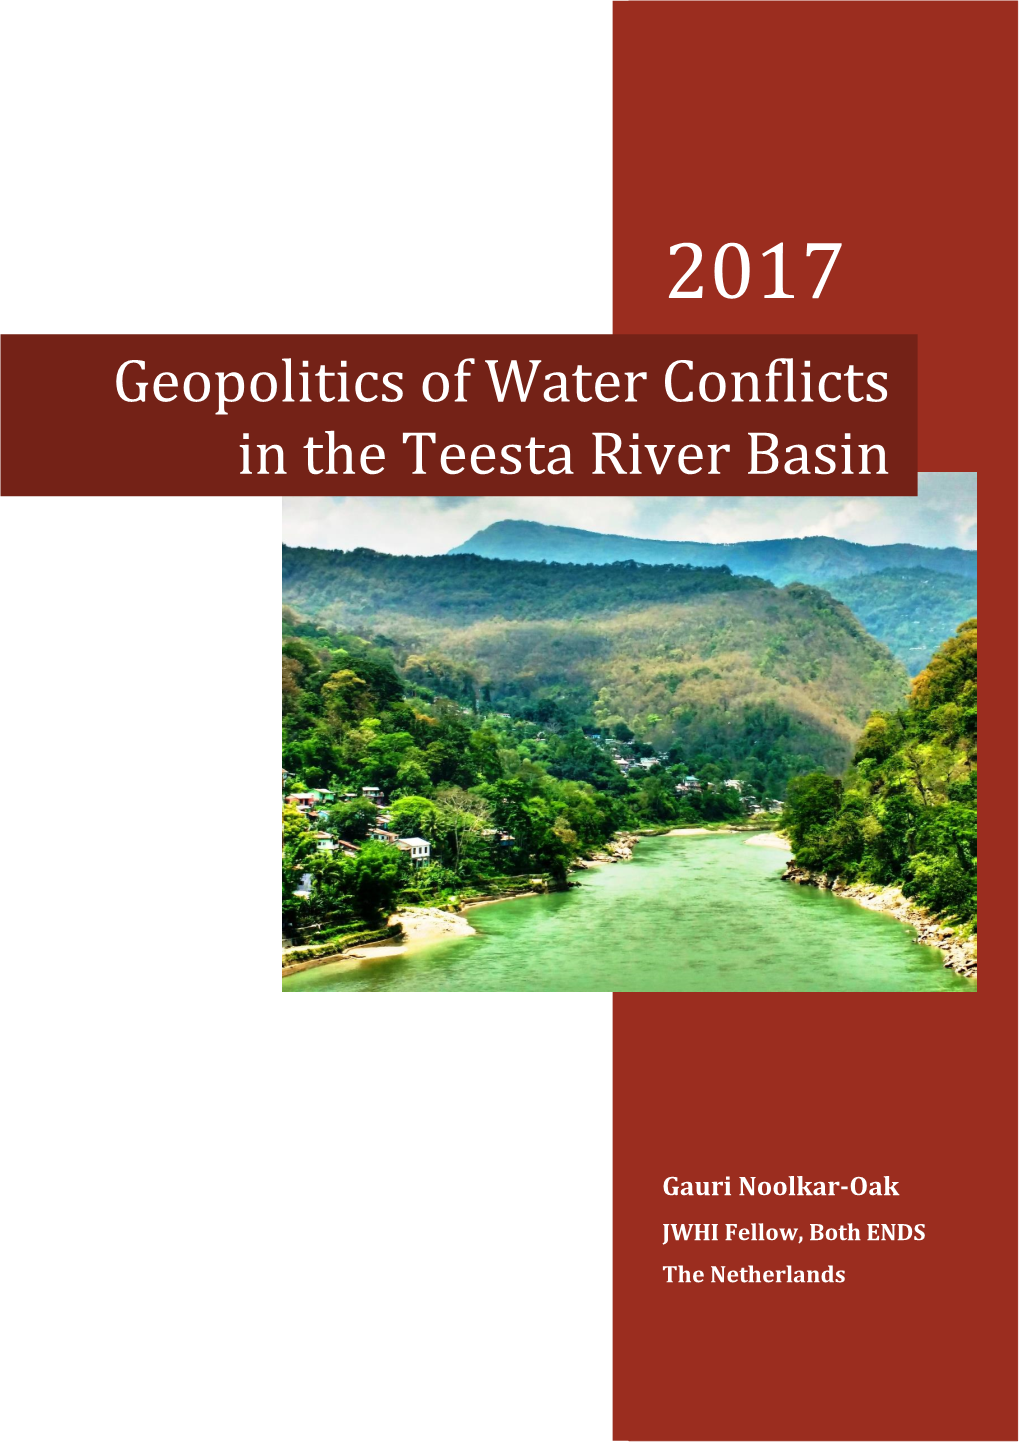 Geopolitics of Water Conflicts in the Teesta River Basin